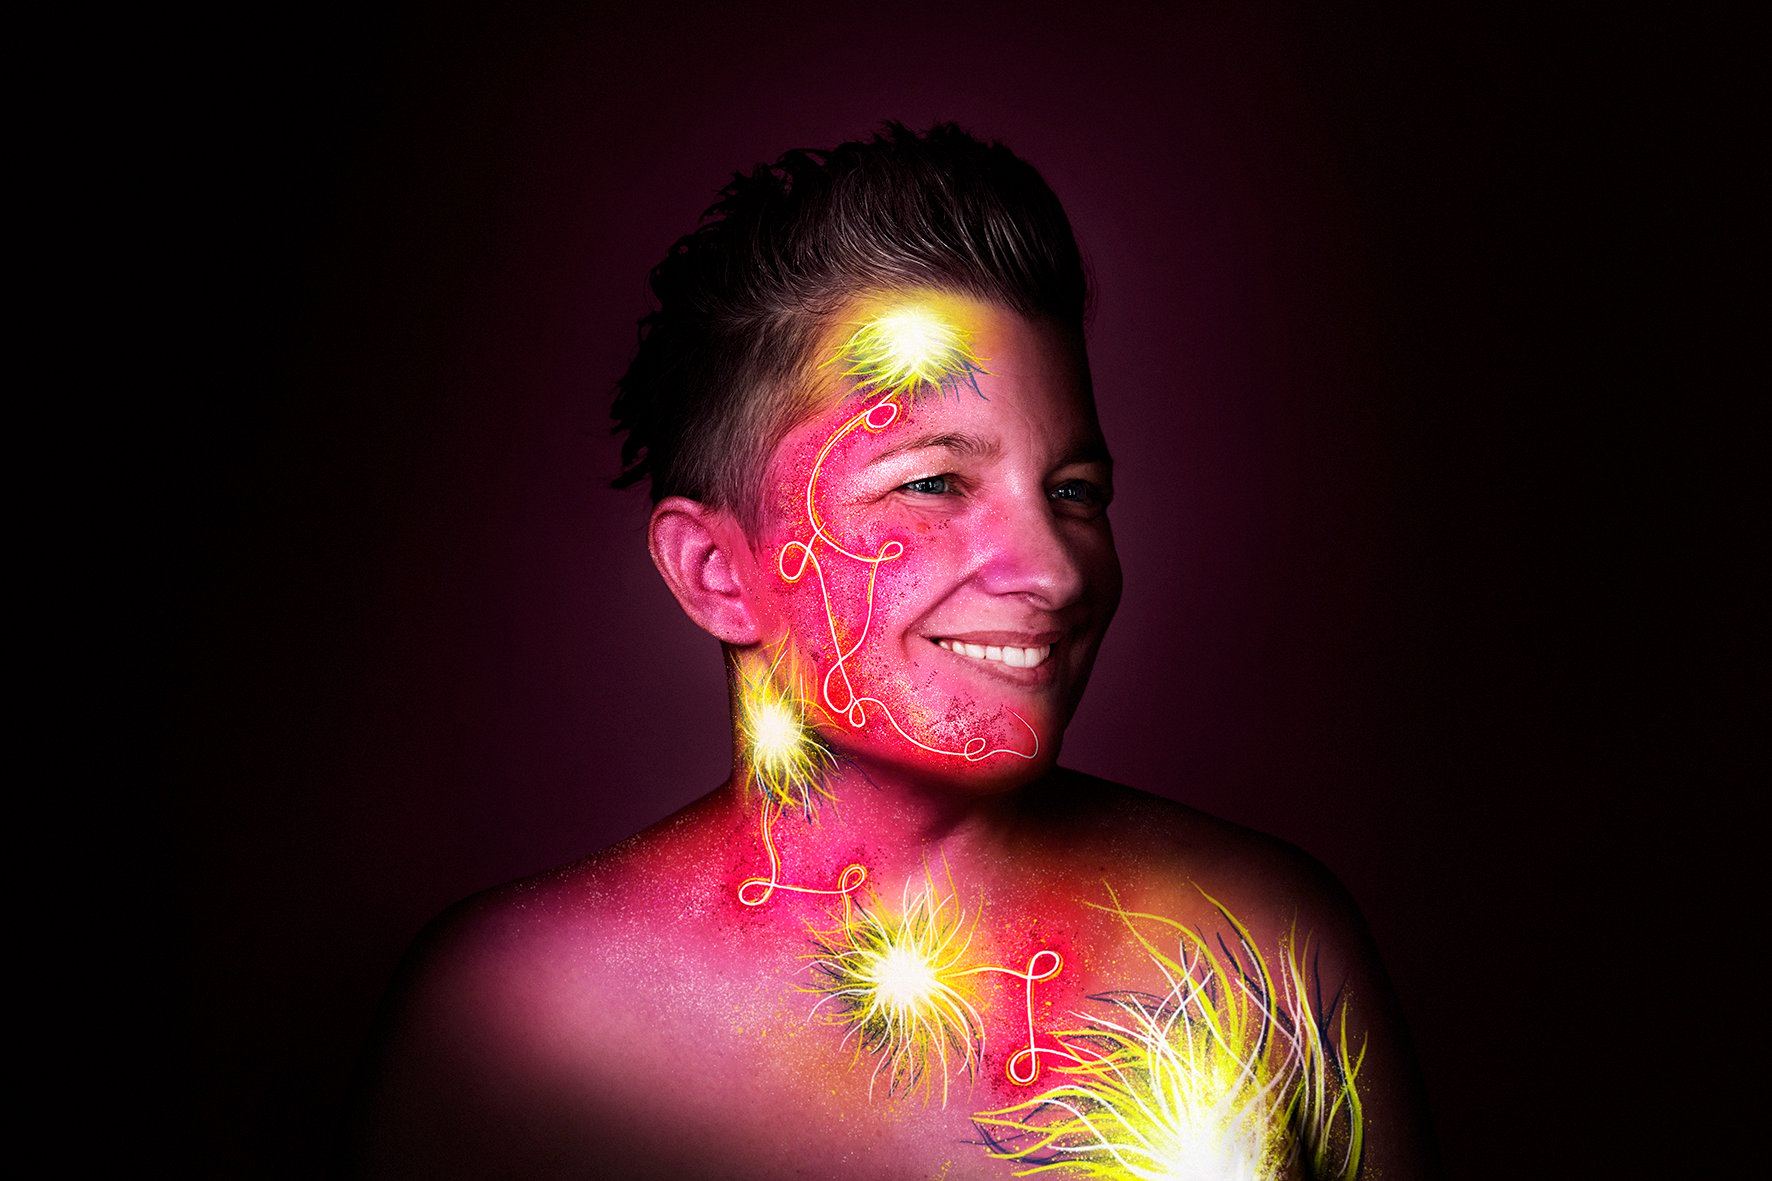 Smiling woman with glowing designs on skin